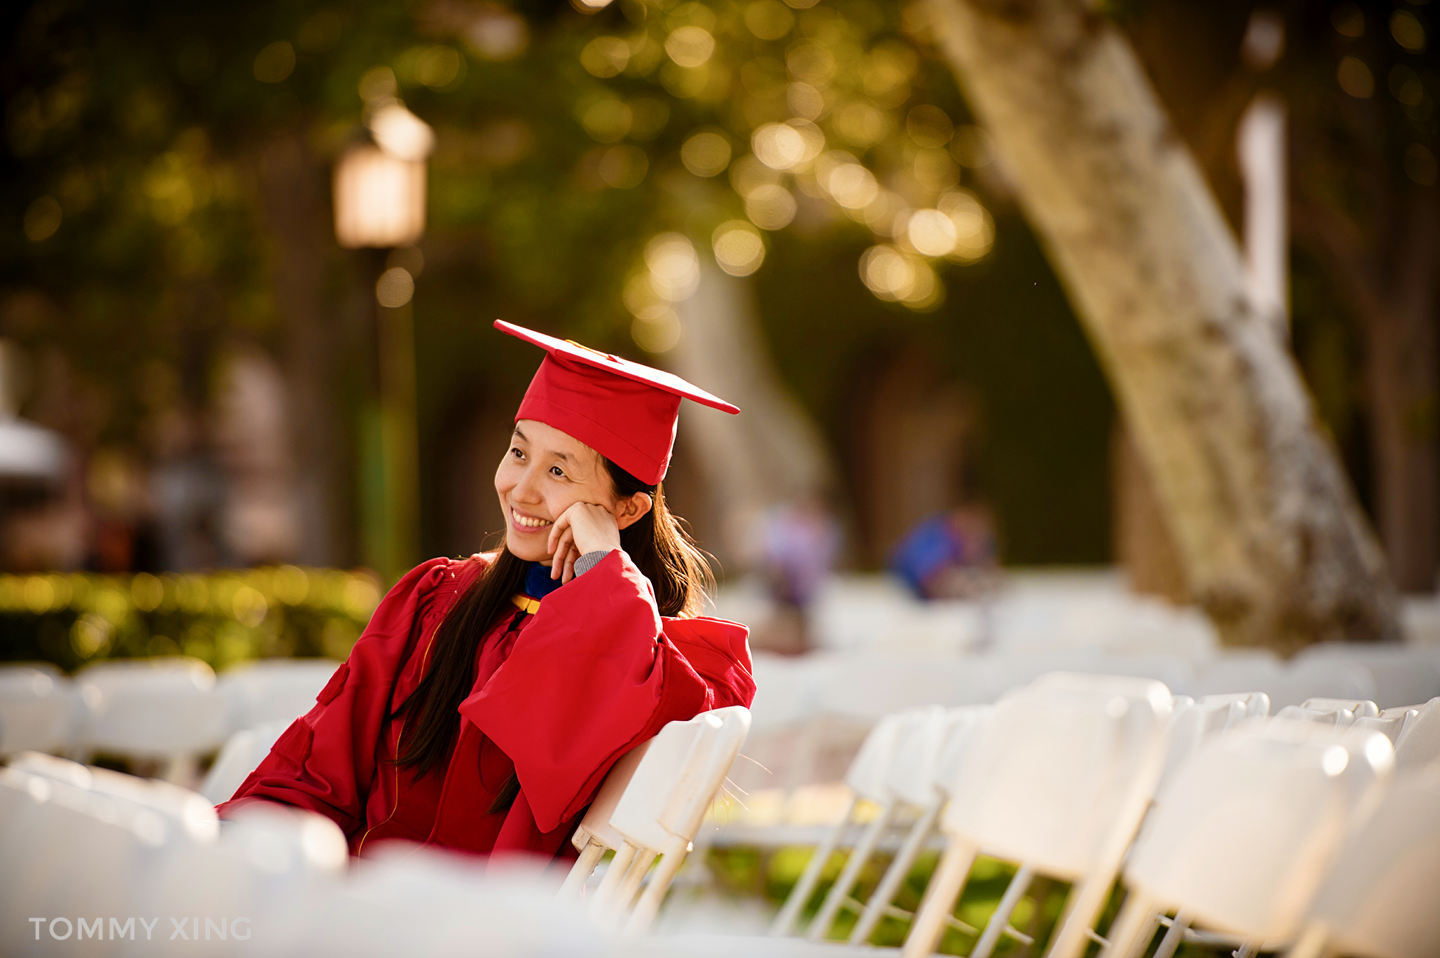 Graduation portrait photography - USC - Los Angeles - Tommy Xing Photography 05.jpg